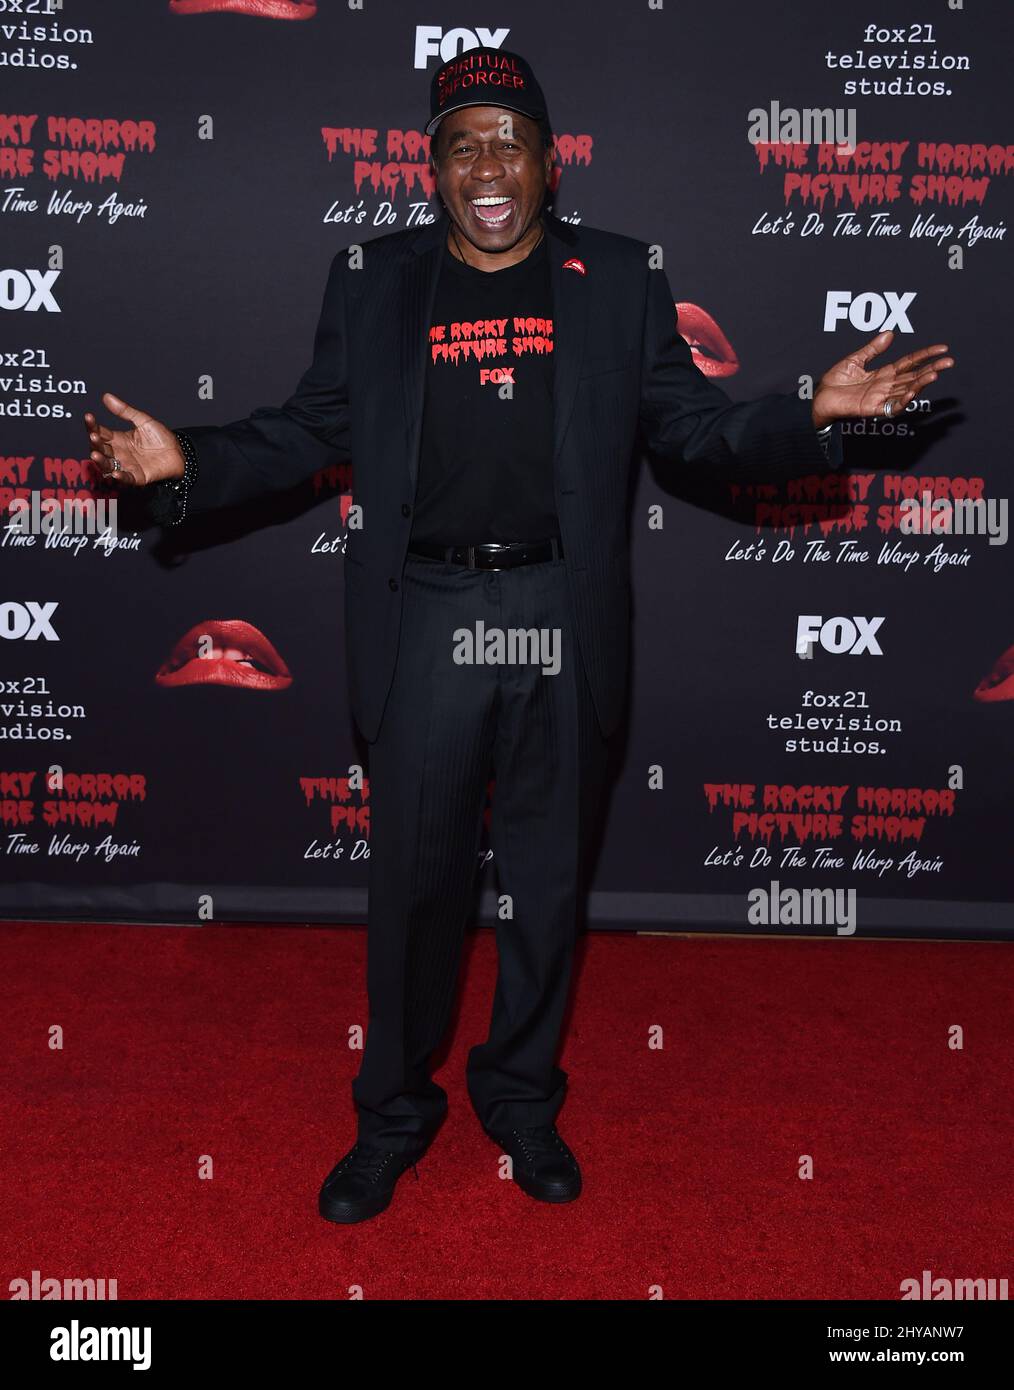 Ben Vereen attending the Rocky Horror Picture Show: Let's Do The Time Warp Again Premiere held at The Roxy, in Los Angeles, California. Stock Photo